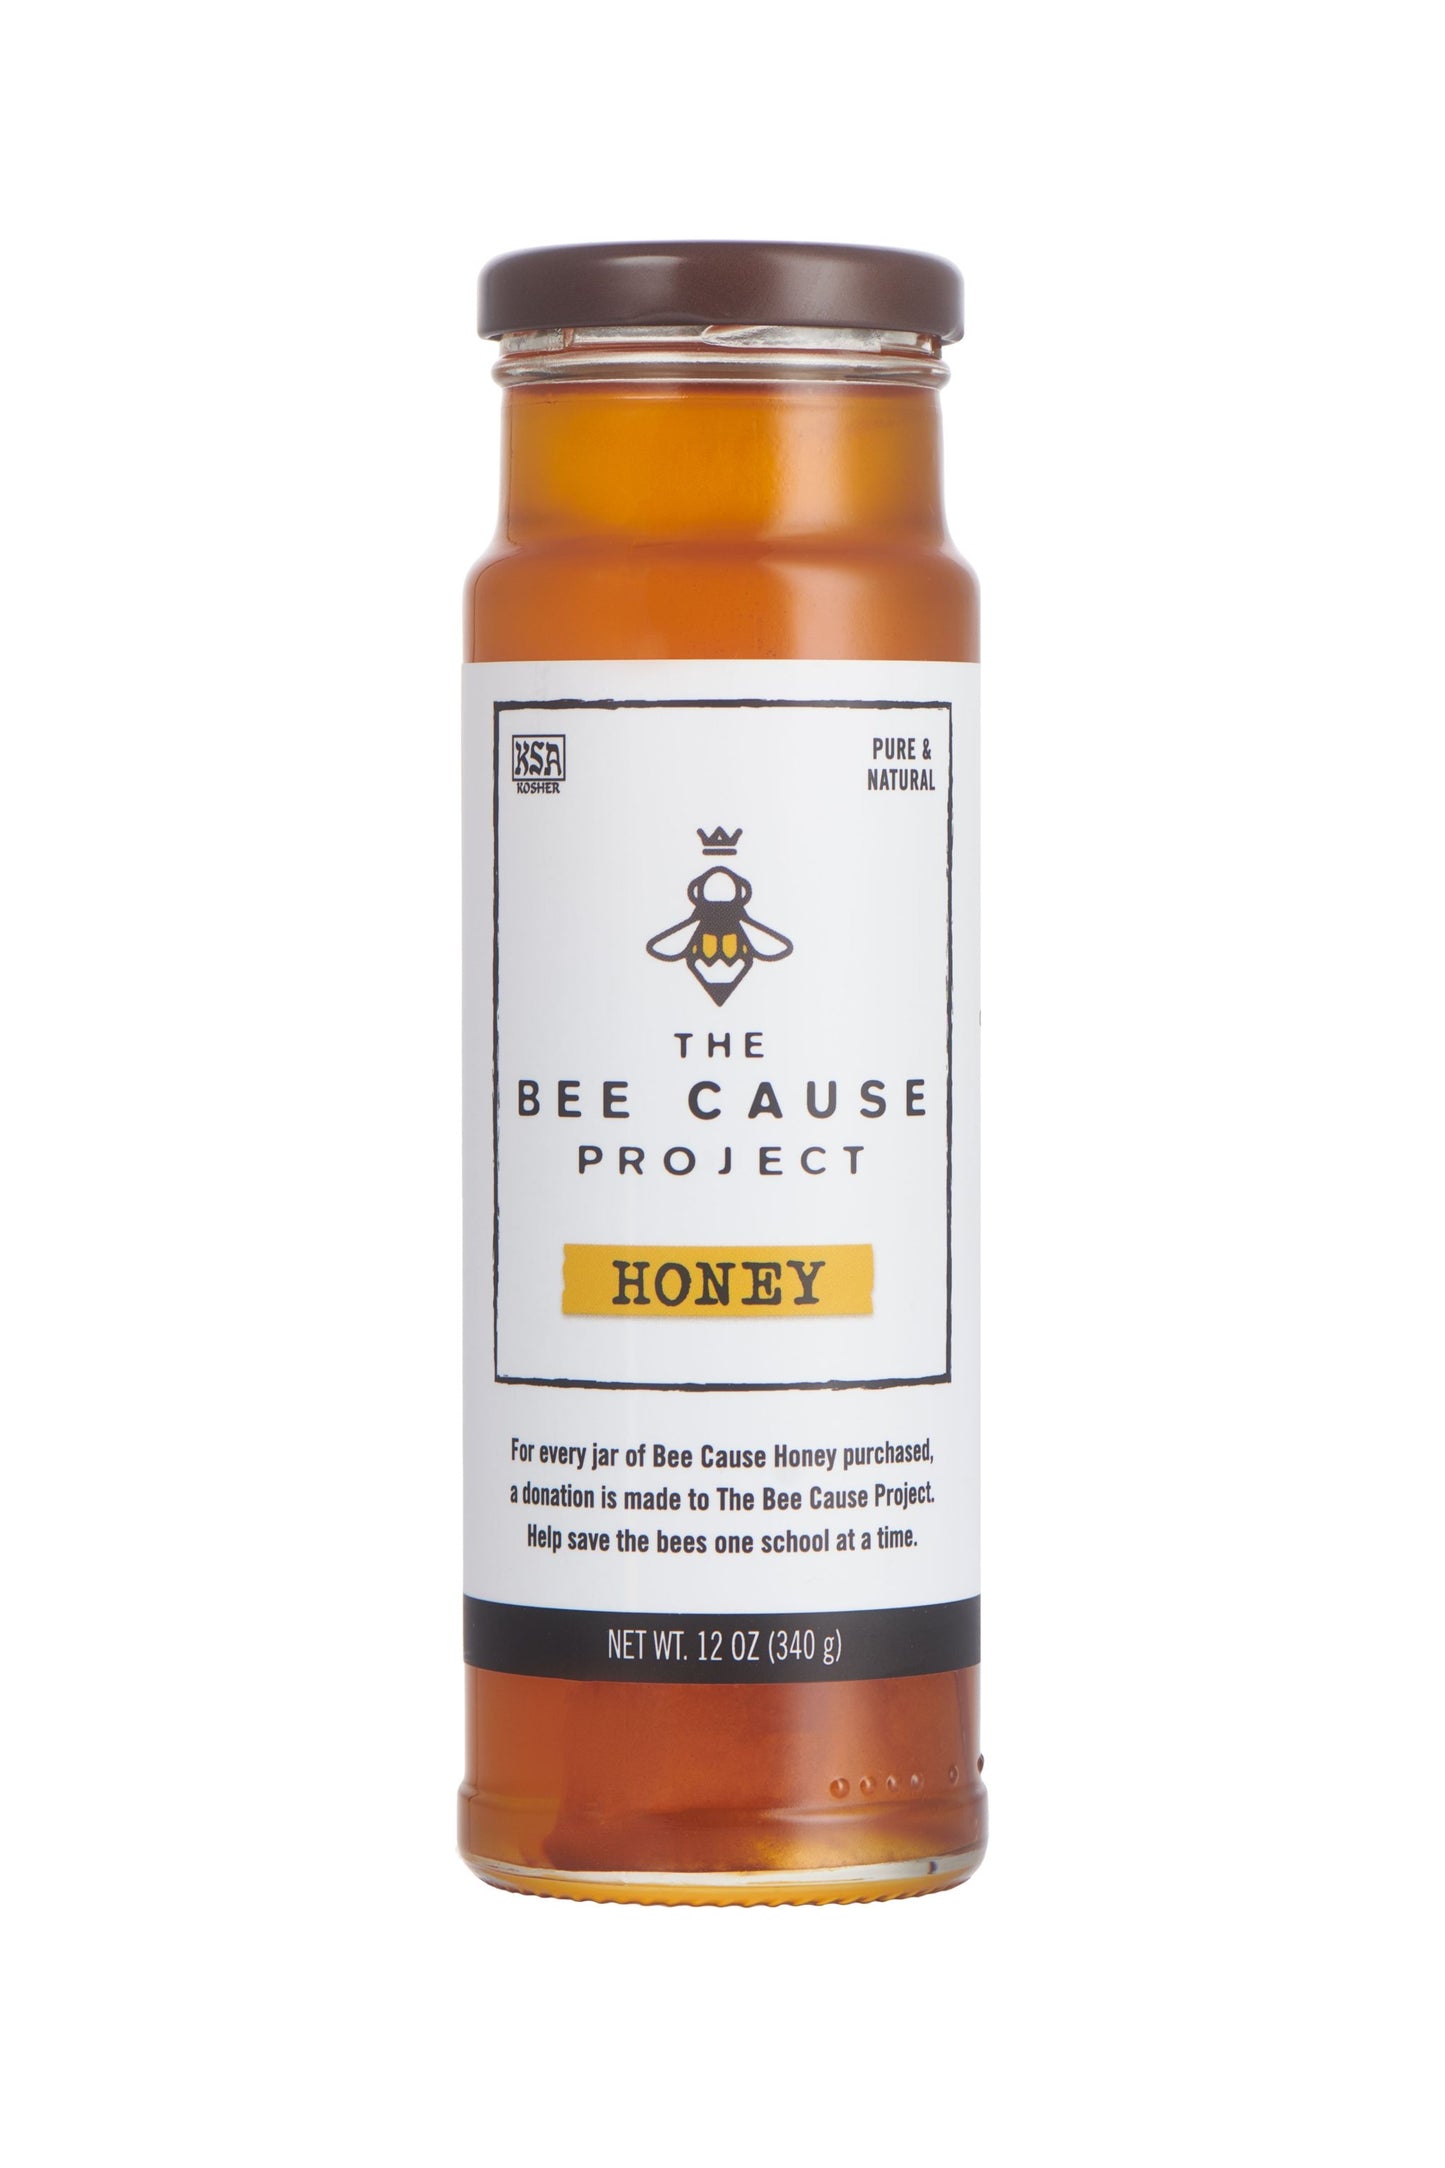 The Bee Cause Honey in a 12oz jar. This honey goes to support The Bee Cause Project. Helping save the bees one school at a time.